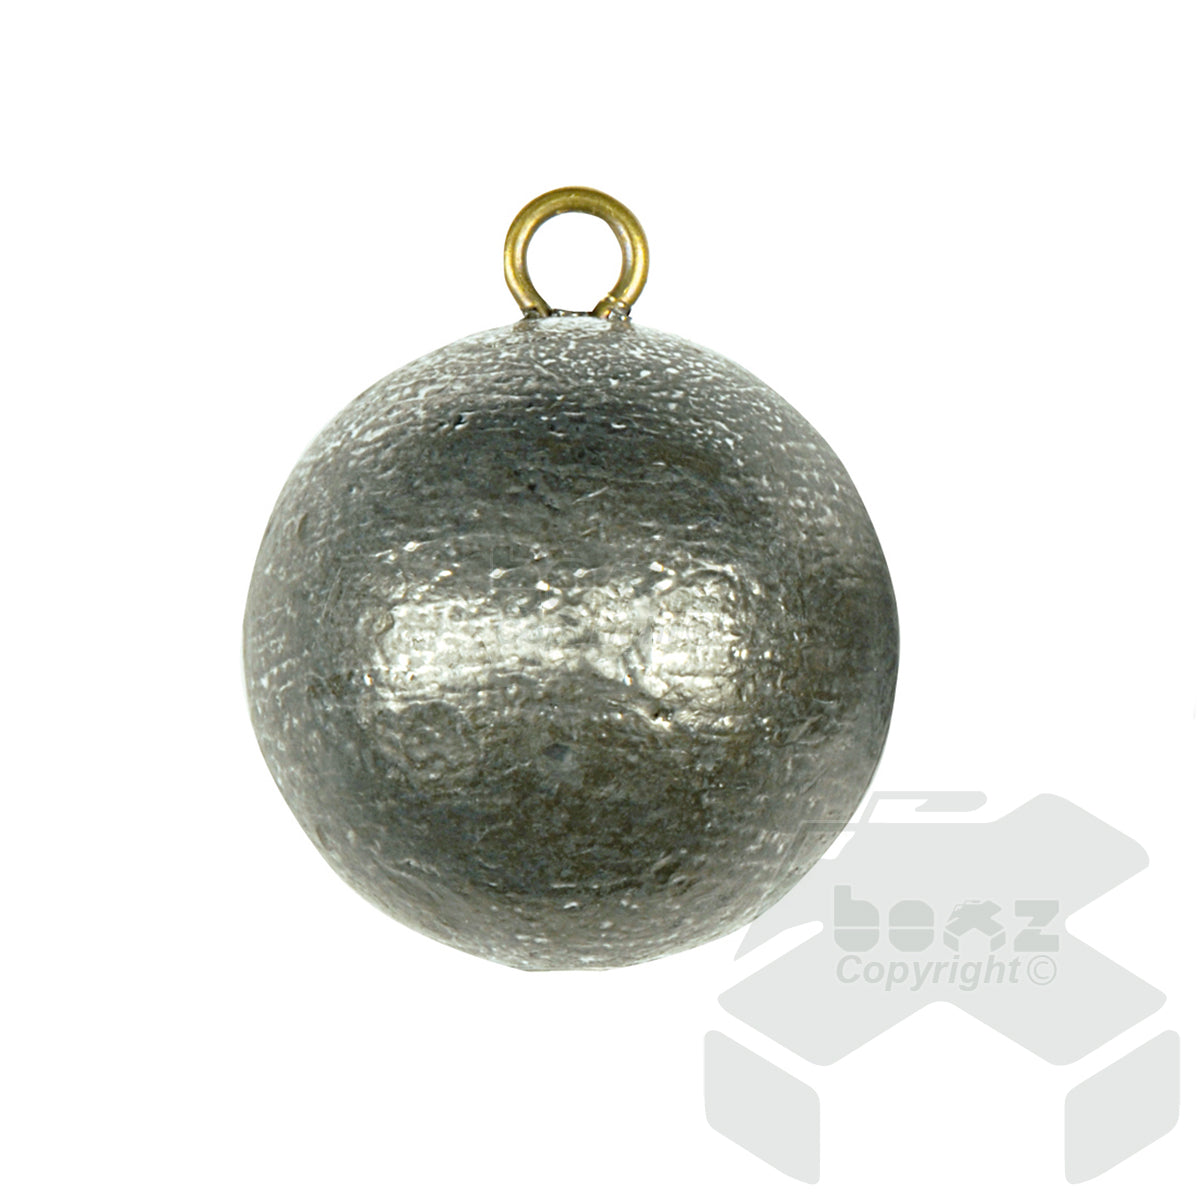 Seatech Cannonball Weight